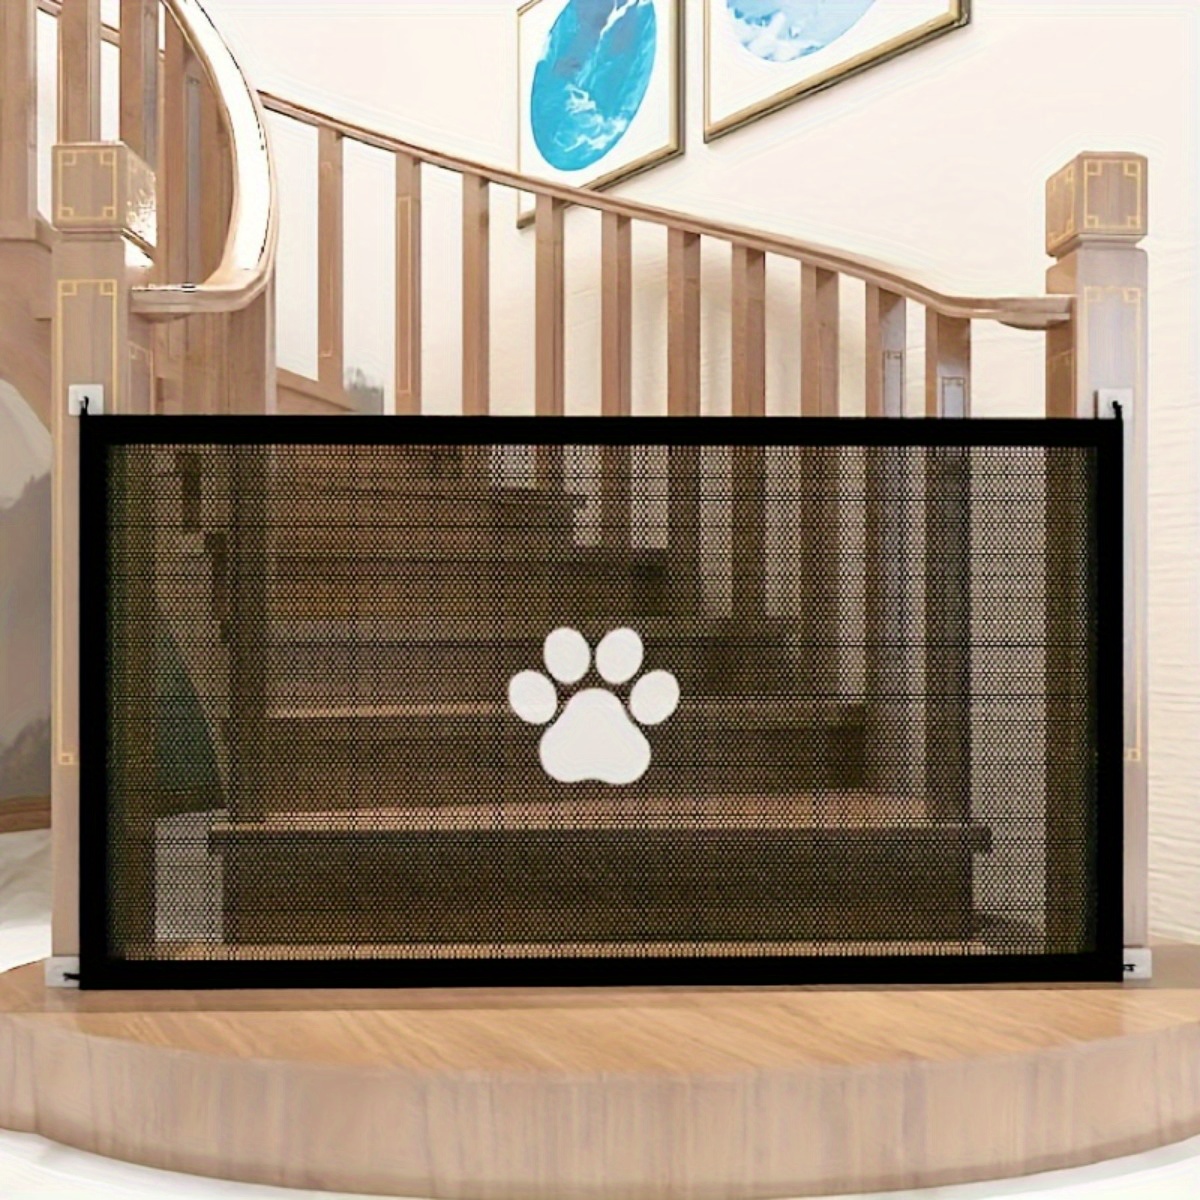 

Versatile Pet Safety Gate - Expandable Mesh Pet Gate Portable Adjustable Safety Dog Gate - Indoor Outdoor Gate - Easy Install Stair Barrier For Pets